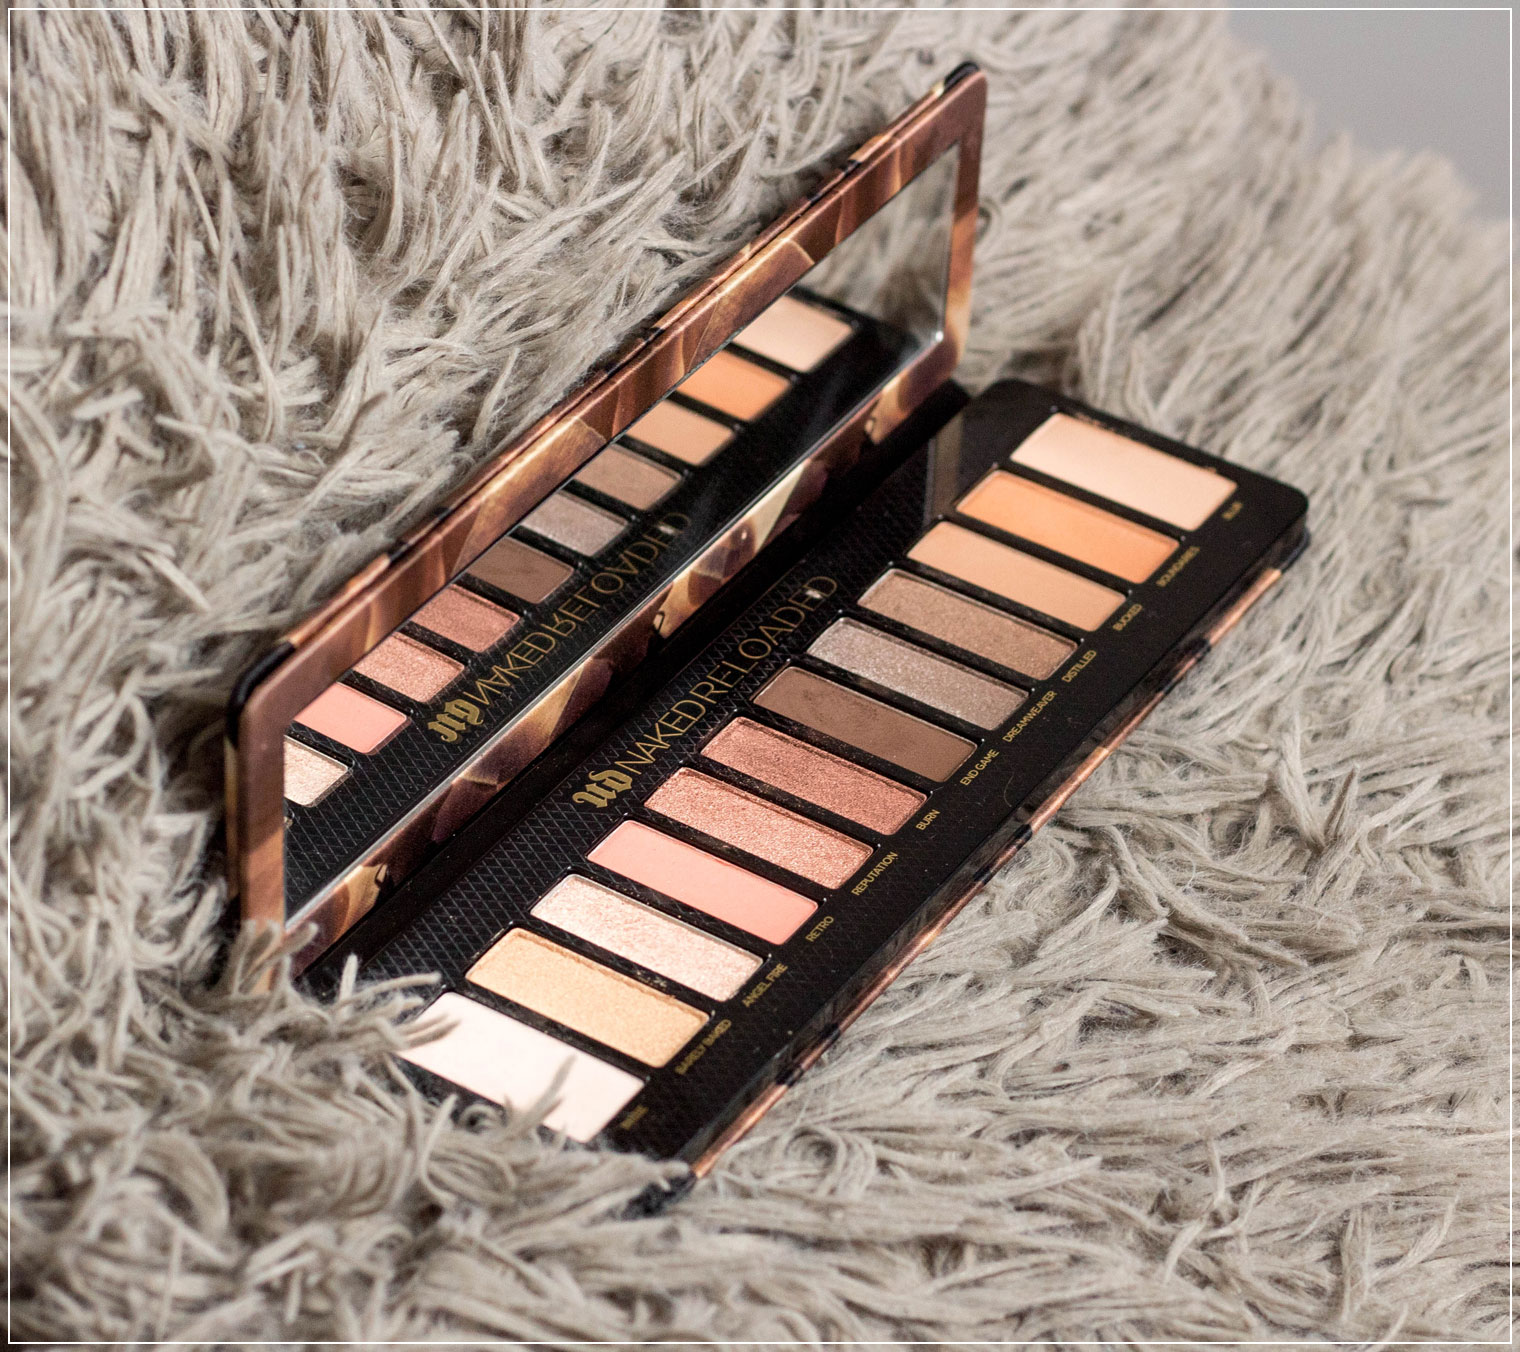 Naked Reloaded Review, Naked Reloaded, Tages-Make-Up, Lidschatten-Palette Beautytutorial, Make-up Tutorial, Beauty Blog, Beautybloggerin, Ruhrgebiet